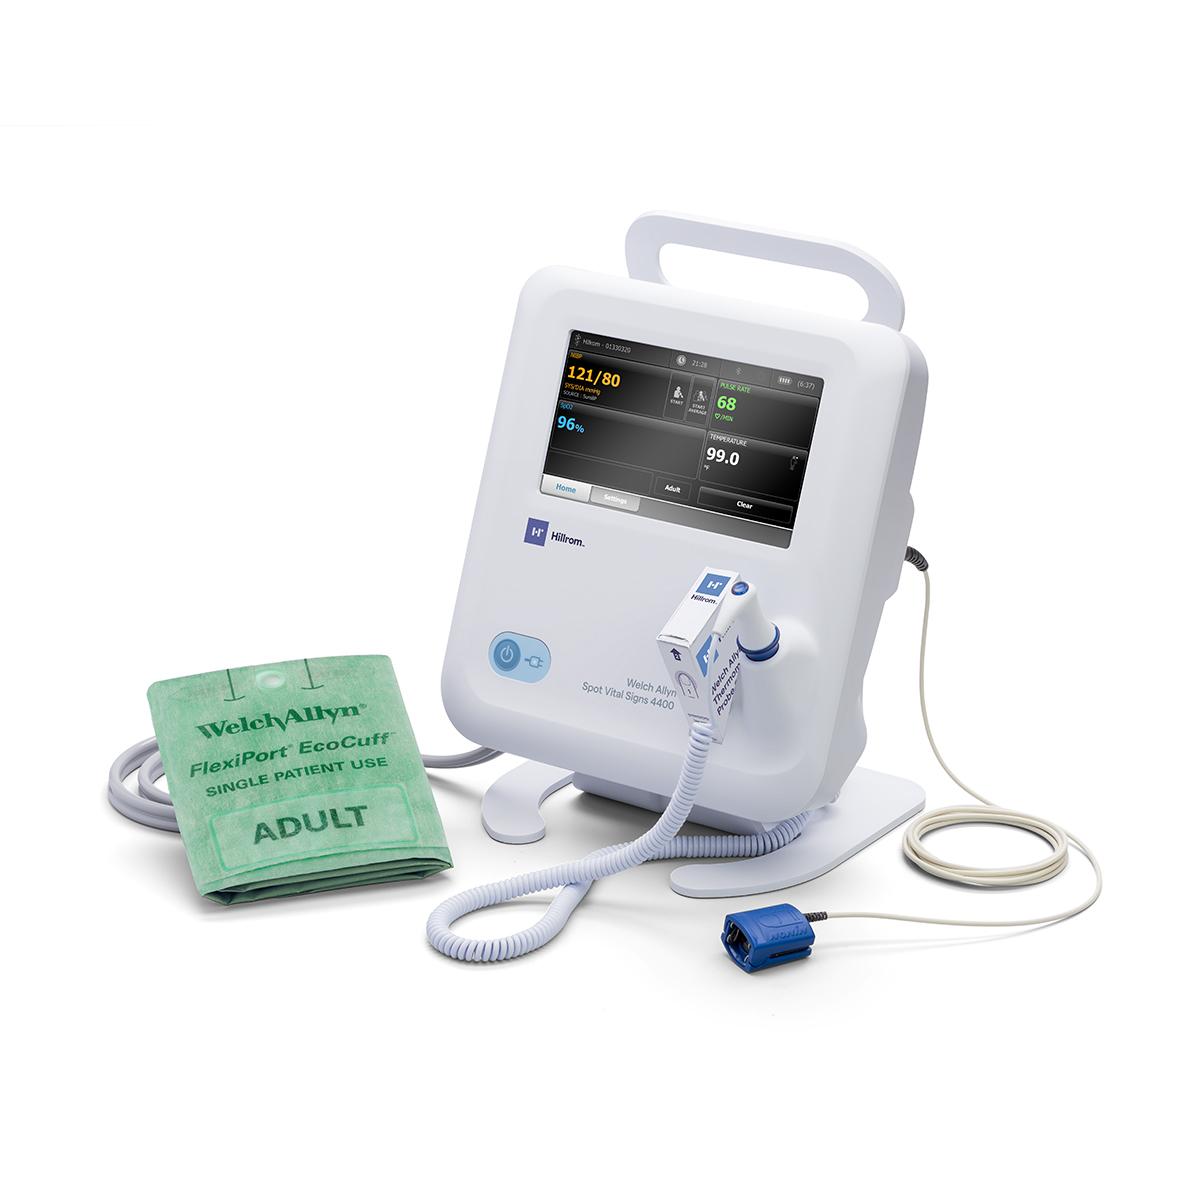 The Hillrom™ Extended Care Solution uses the Welch Allyn® Spot Vital Signs® 4400 Device to capture patient vital signs data.